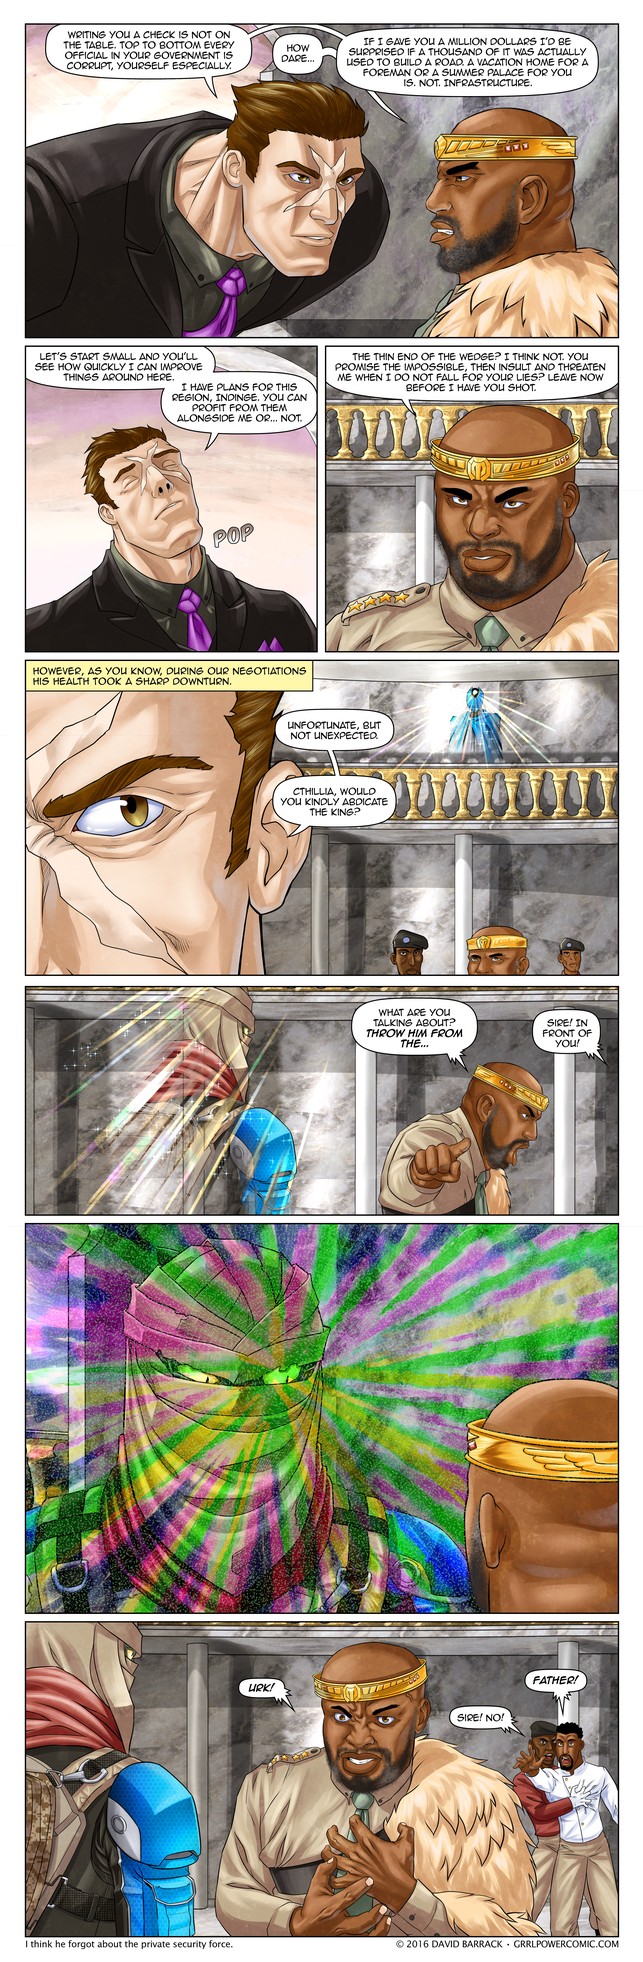 Grrl Power #389 – Interview to a kill